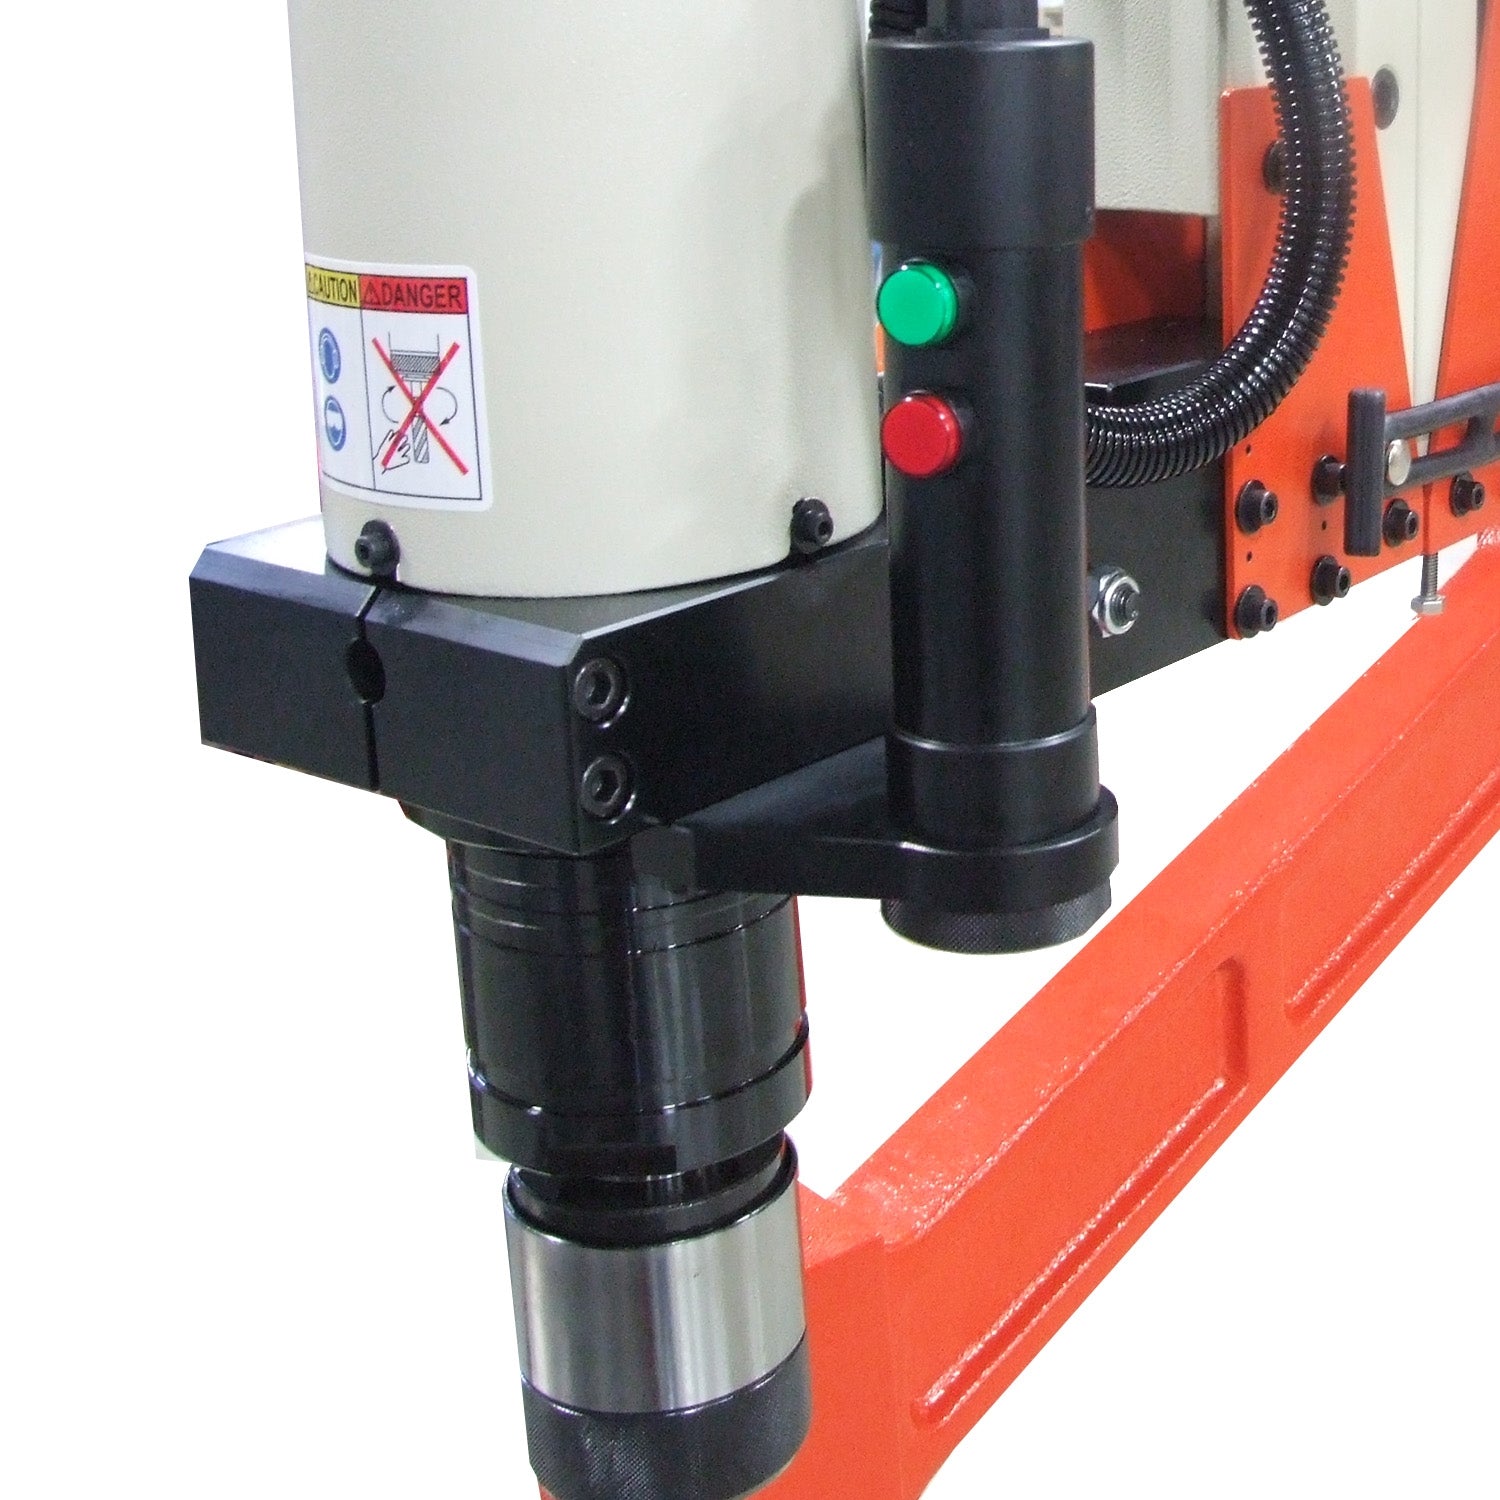 Baileigh ETM-32-1500 220V 1 Phase Double Arm Articulated Tapping Machine, 1/8"-1-1/4" Tap Capacity, 74" Work Range